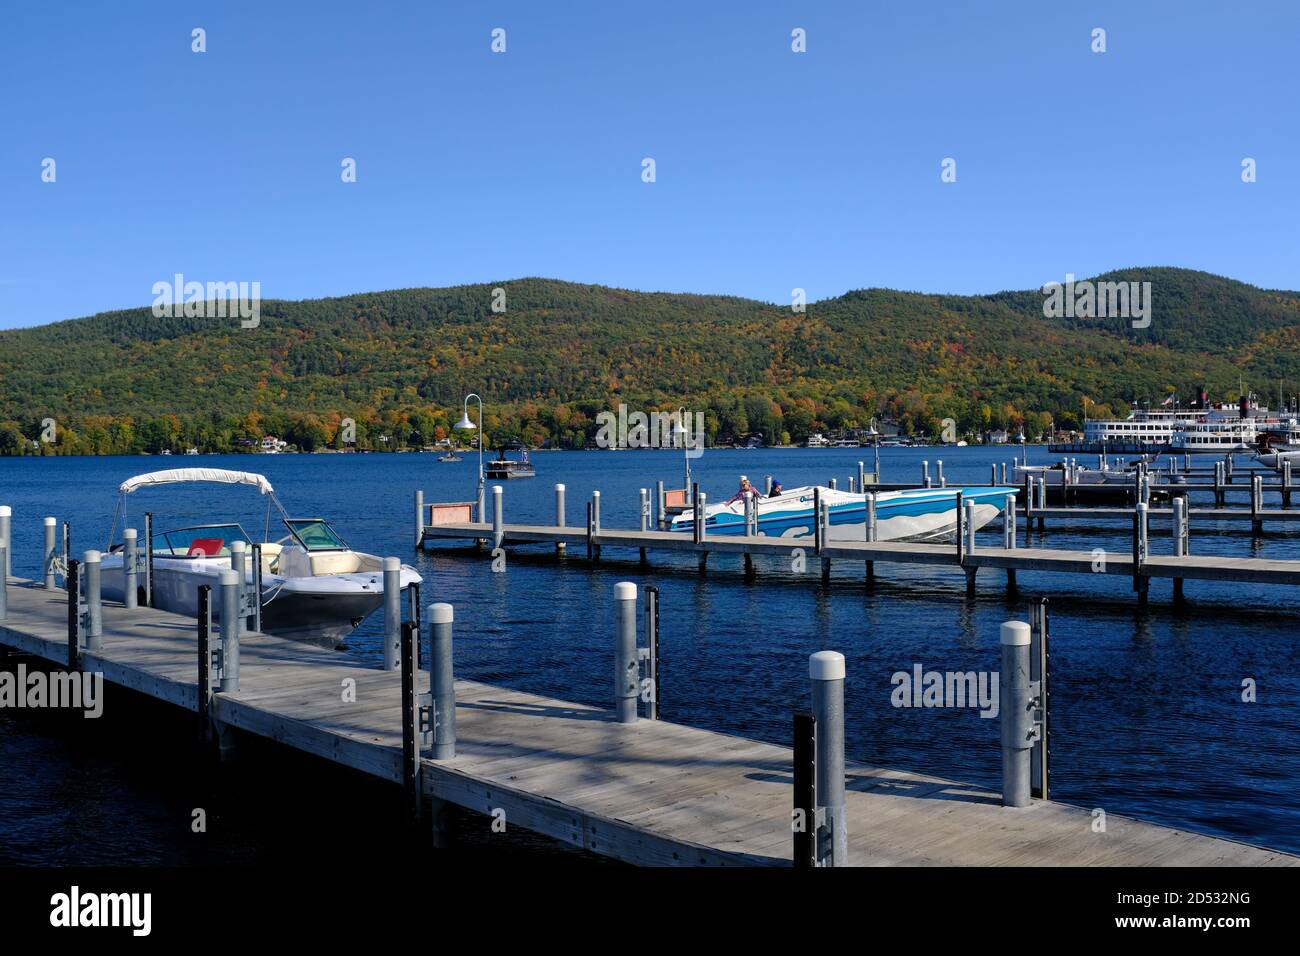 Boats at a dock on Lake George, New York Stock Photo